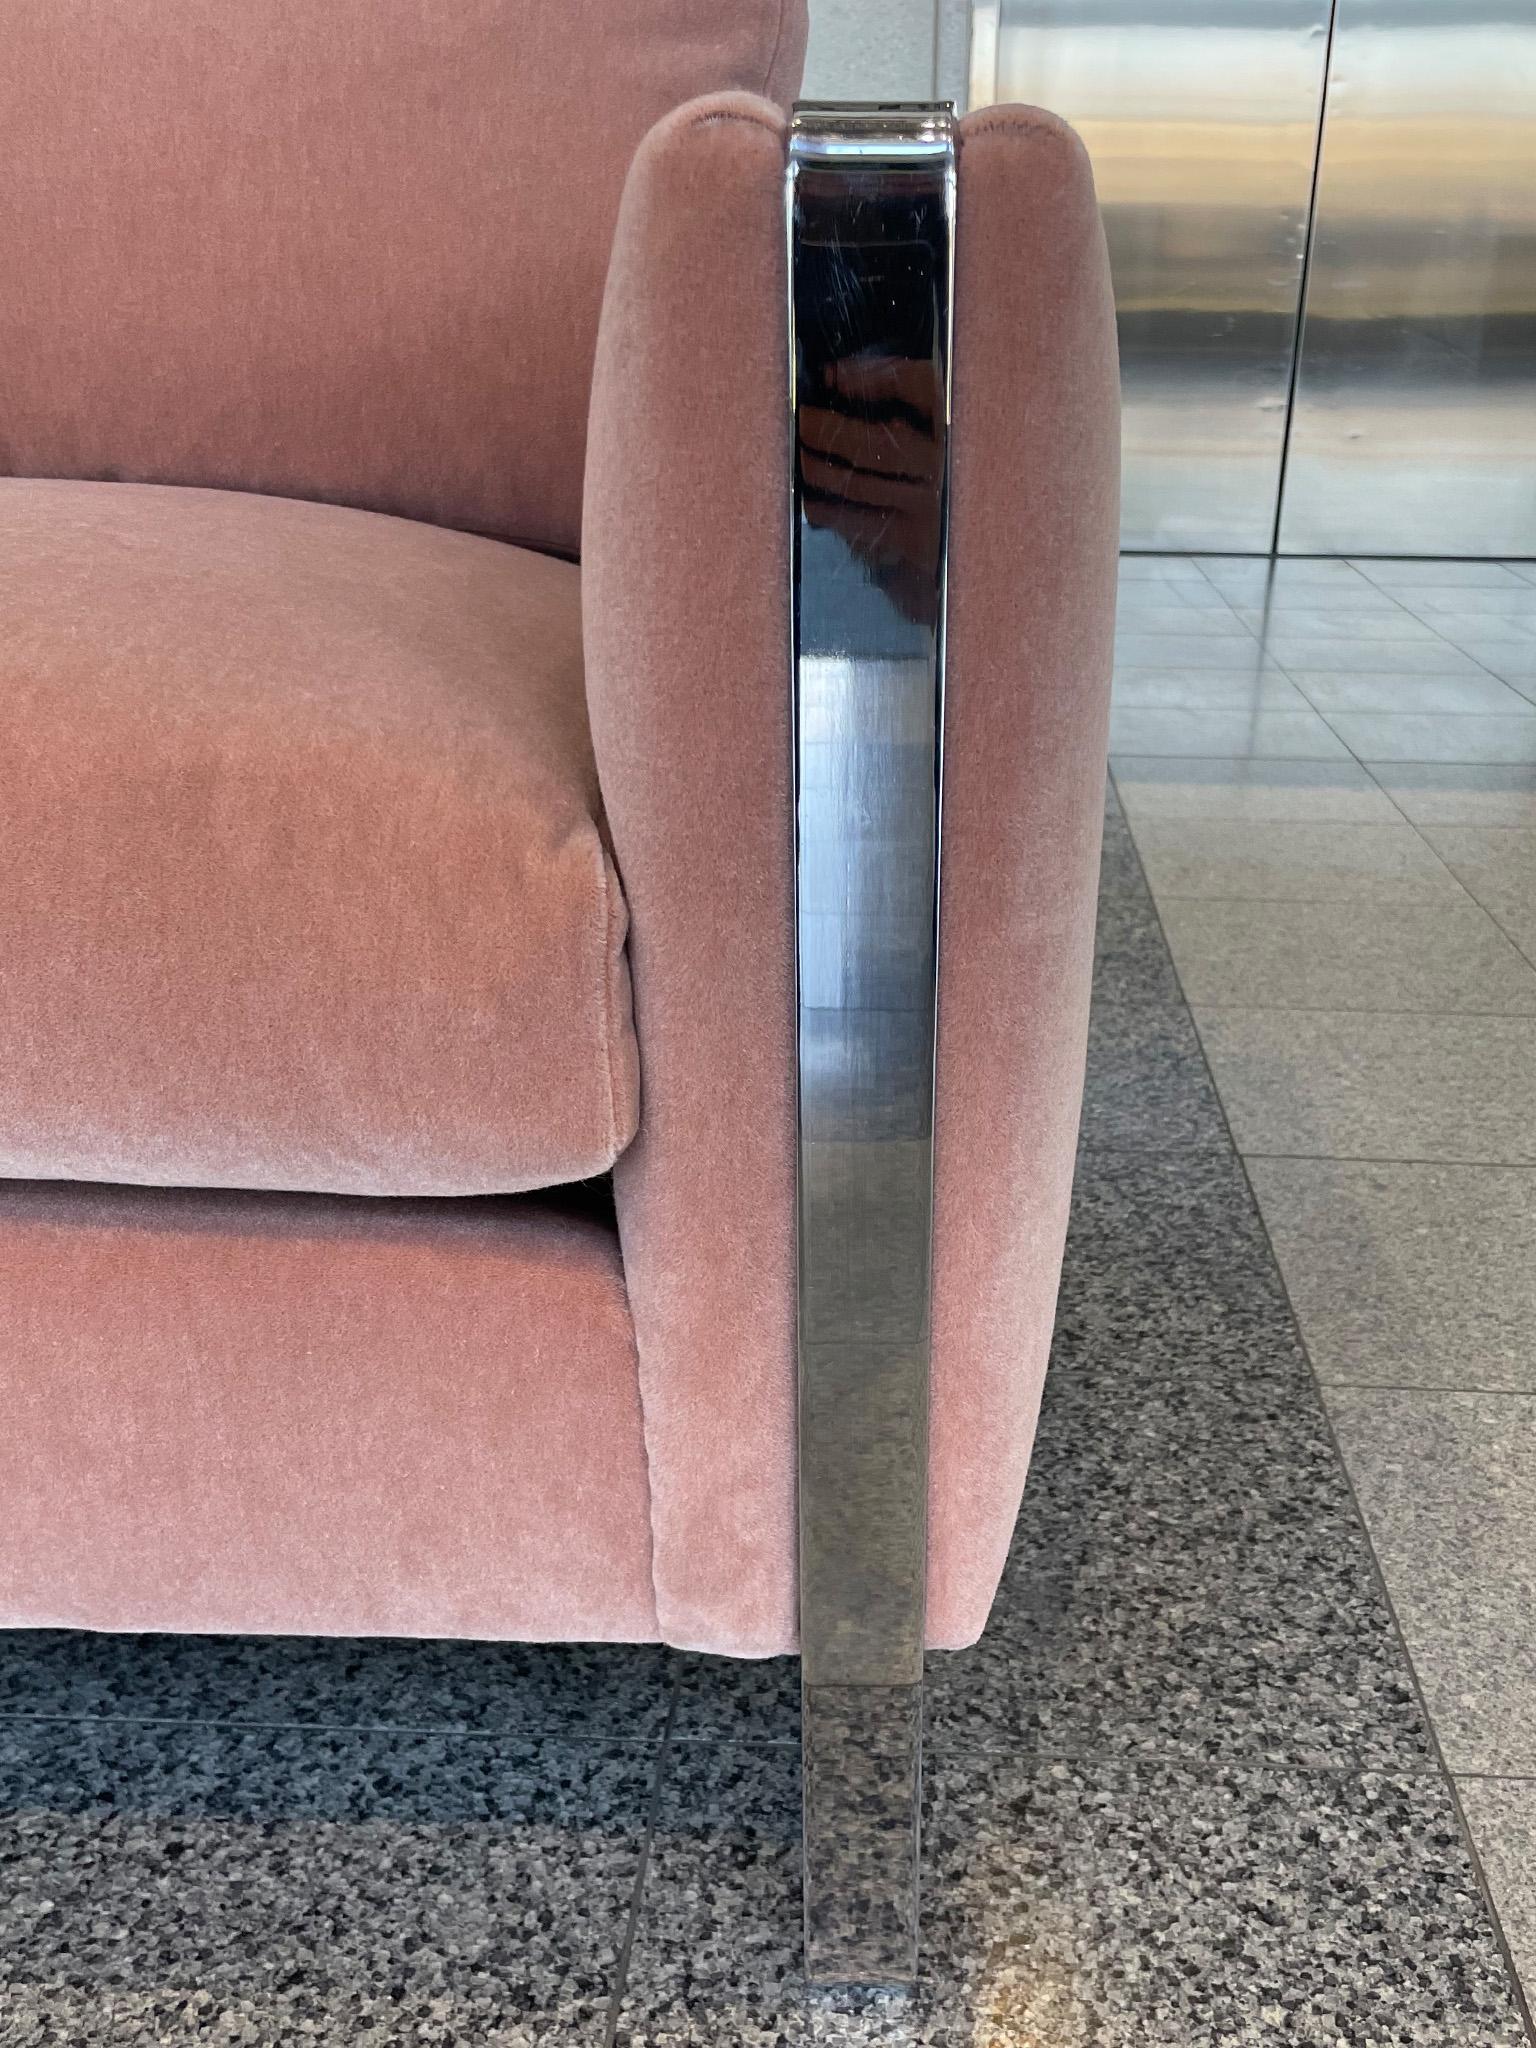 Mid-20th Century Midcentury Chrome Loveseat After Milo Baughman in Dusty Mauve Mohair For Sale